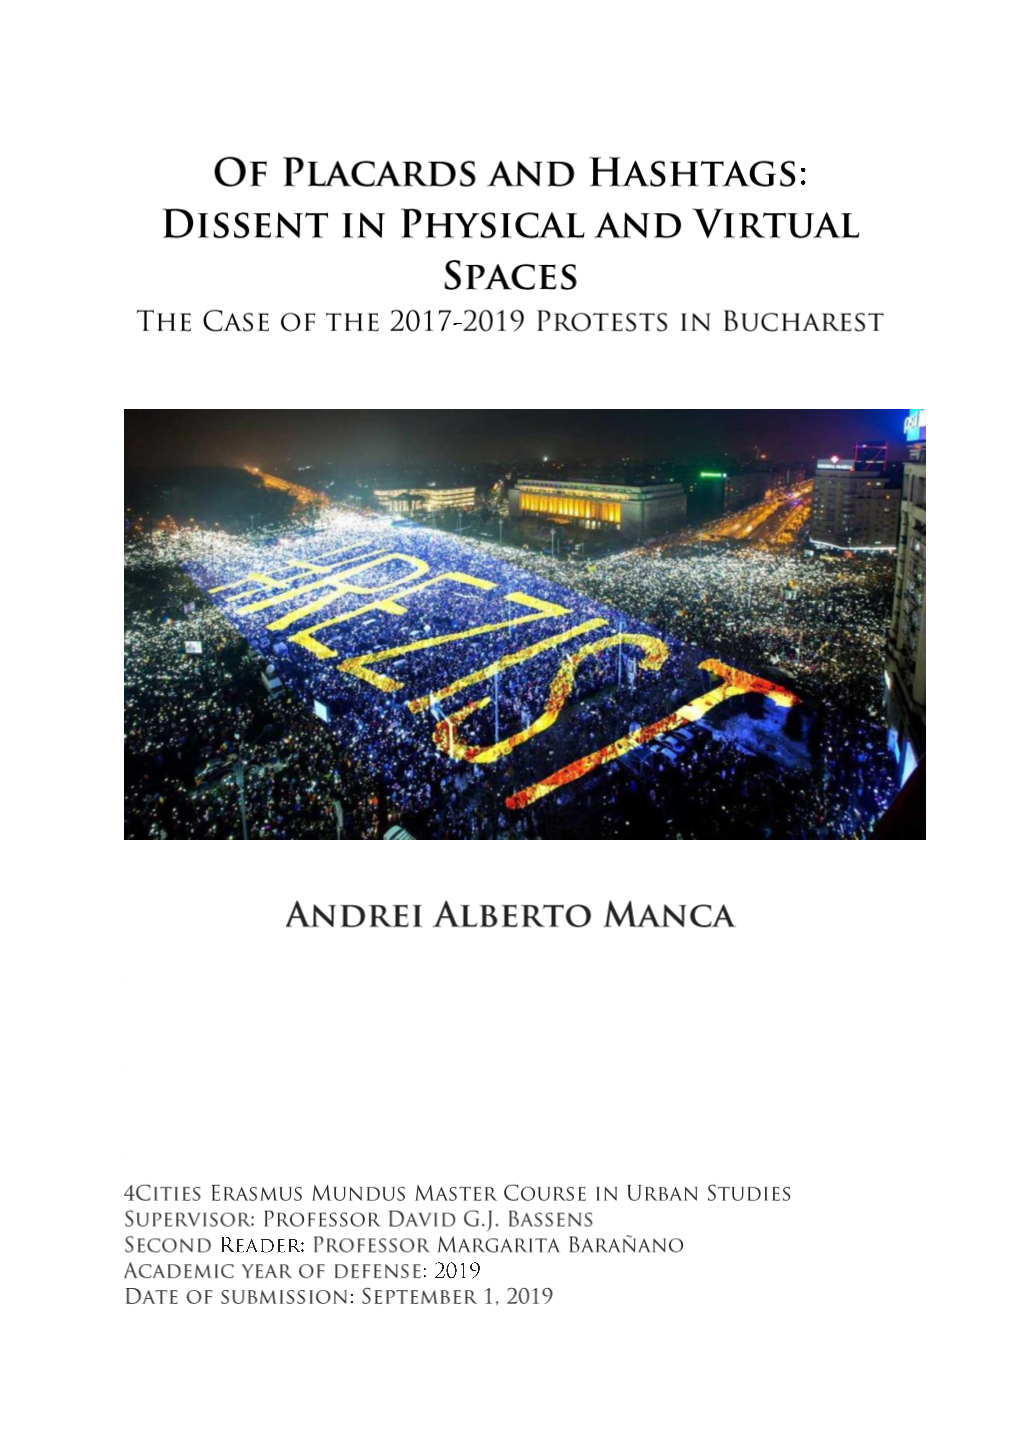 Dissent in Physical and Virtual Spaces. the Case of the 2017-2019